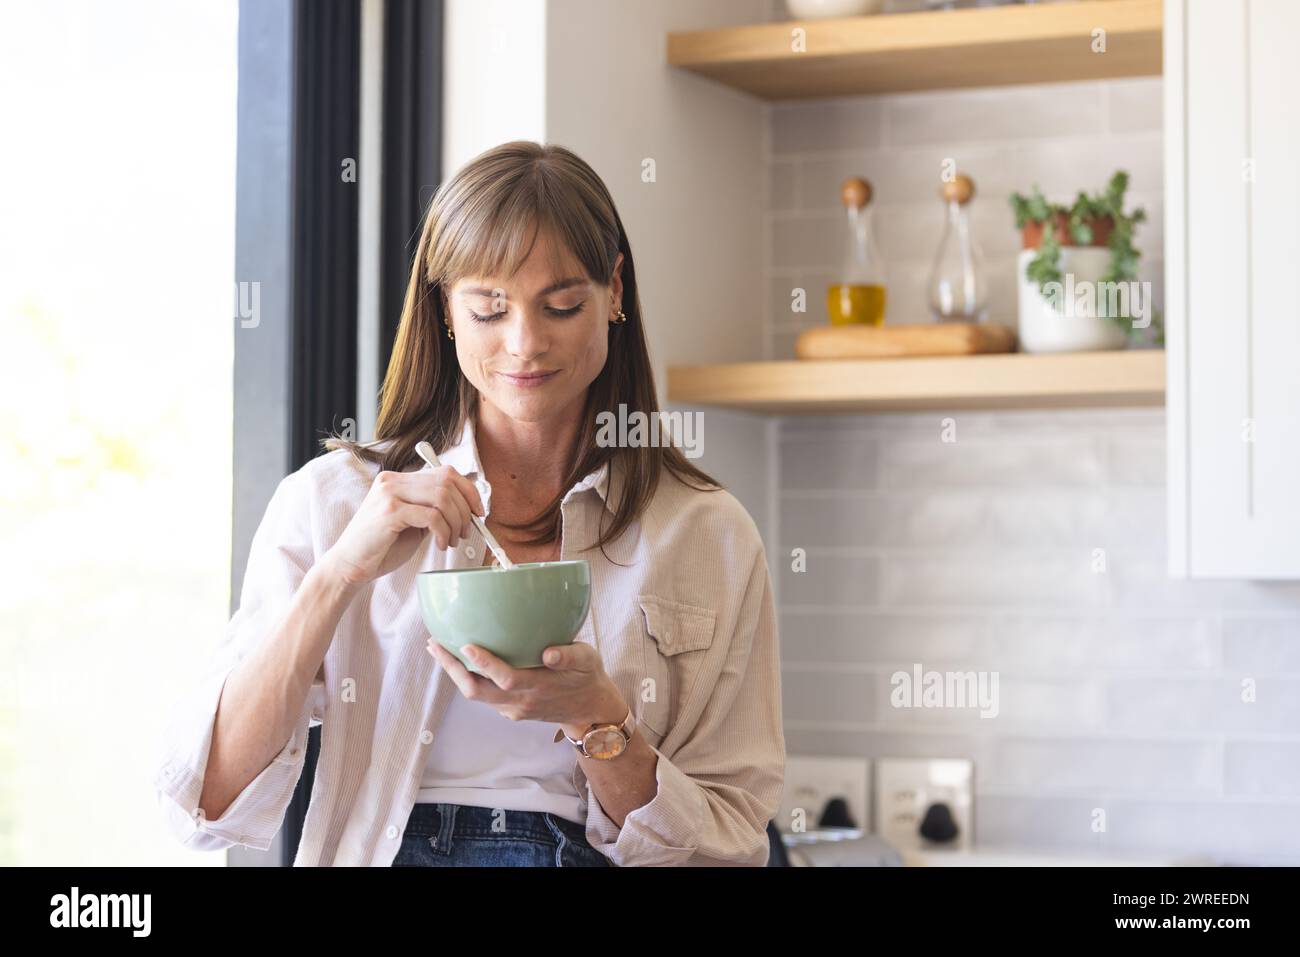 Caucasian woman enjoys a meal in a bright kitchen setting Stock Photo